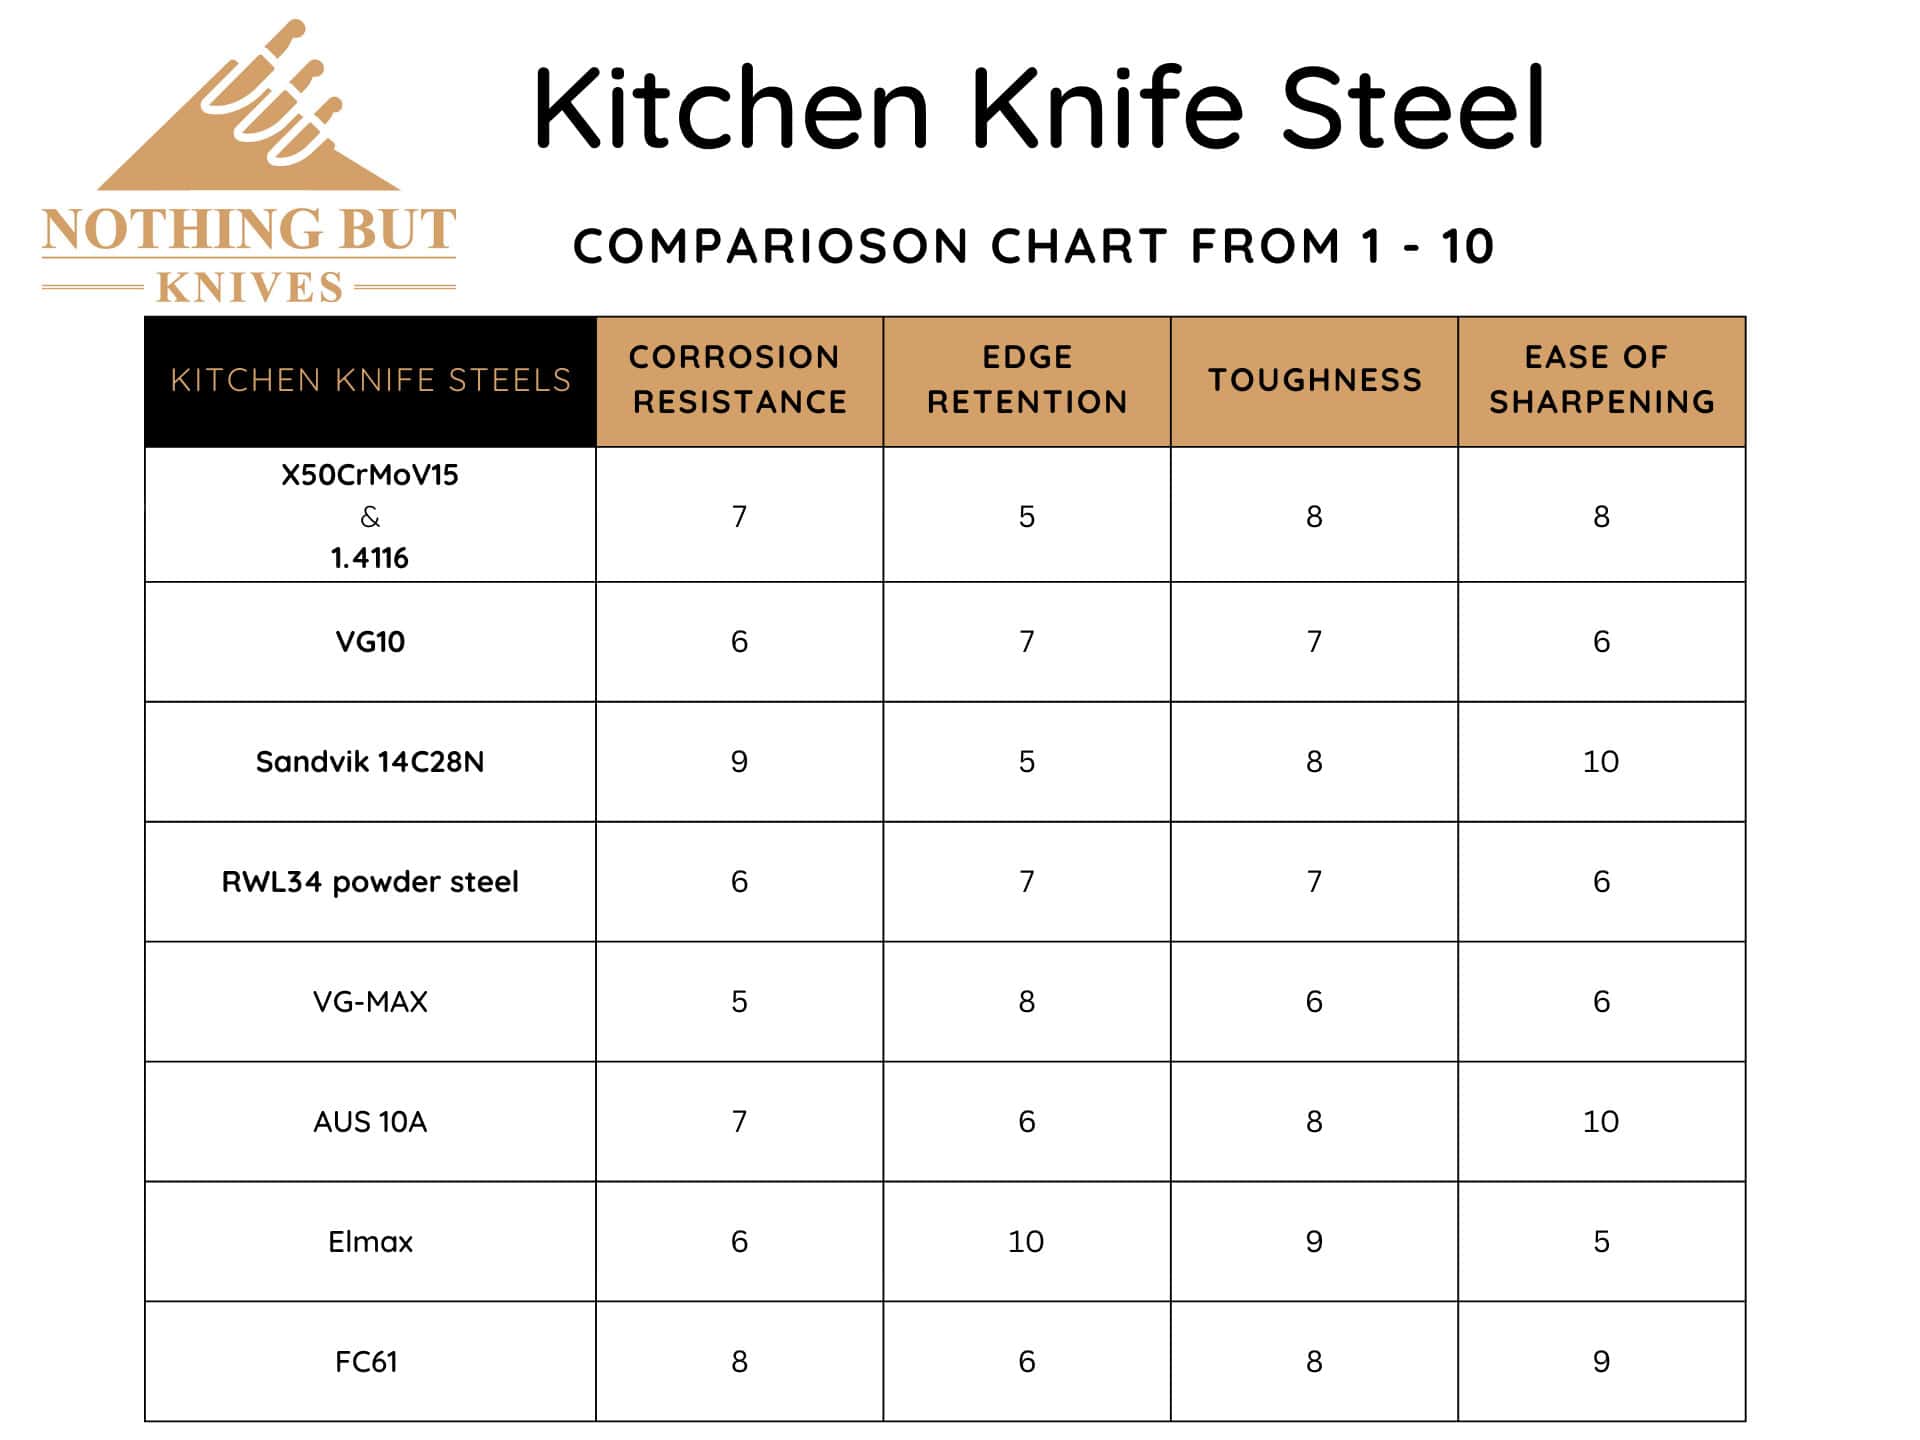 It is important to learn the different characteristics of steel used in professional knives before making a final decision on a knife set.